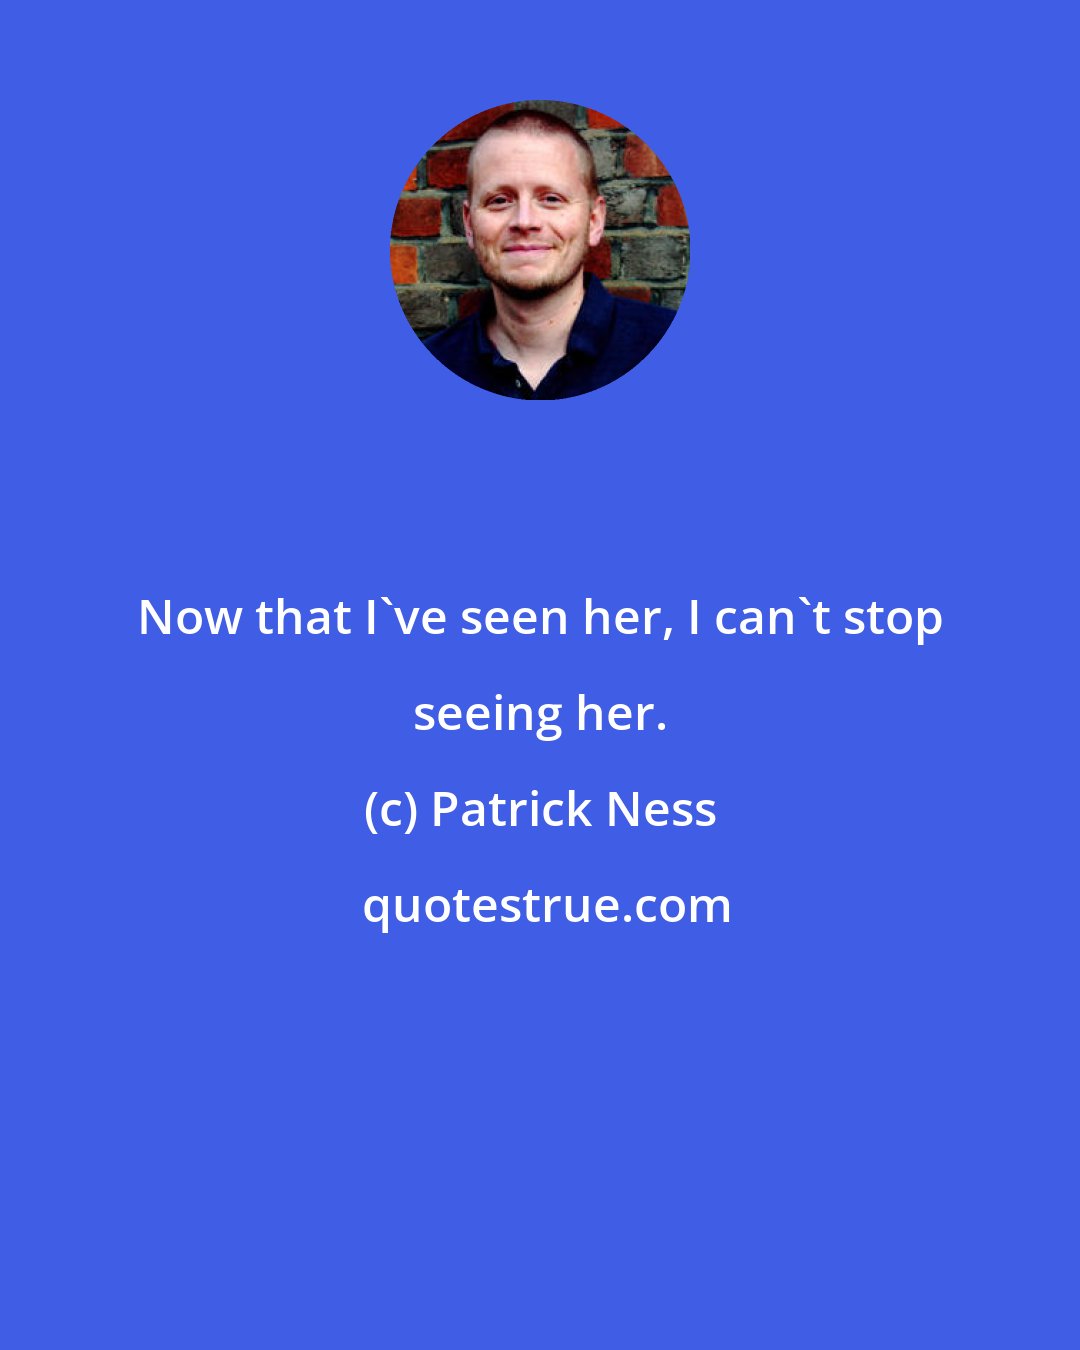 Patrick Ness: Now that I've seen her, I can't stop seeing her.